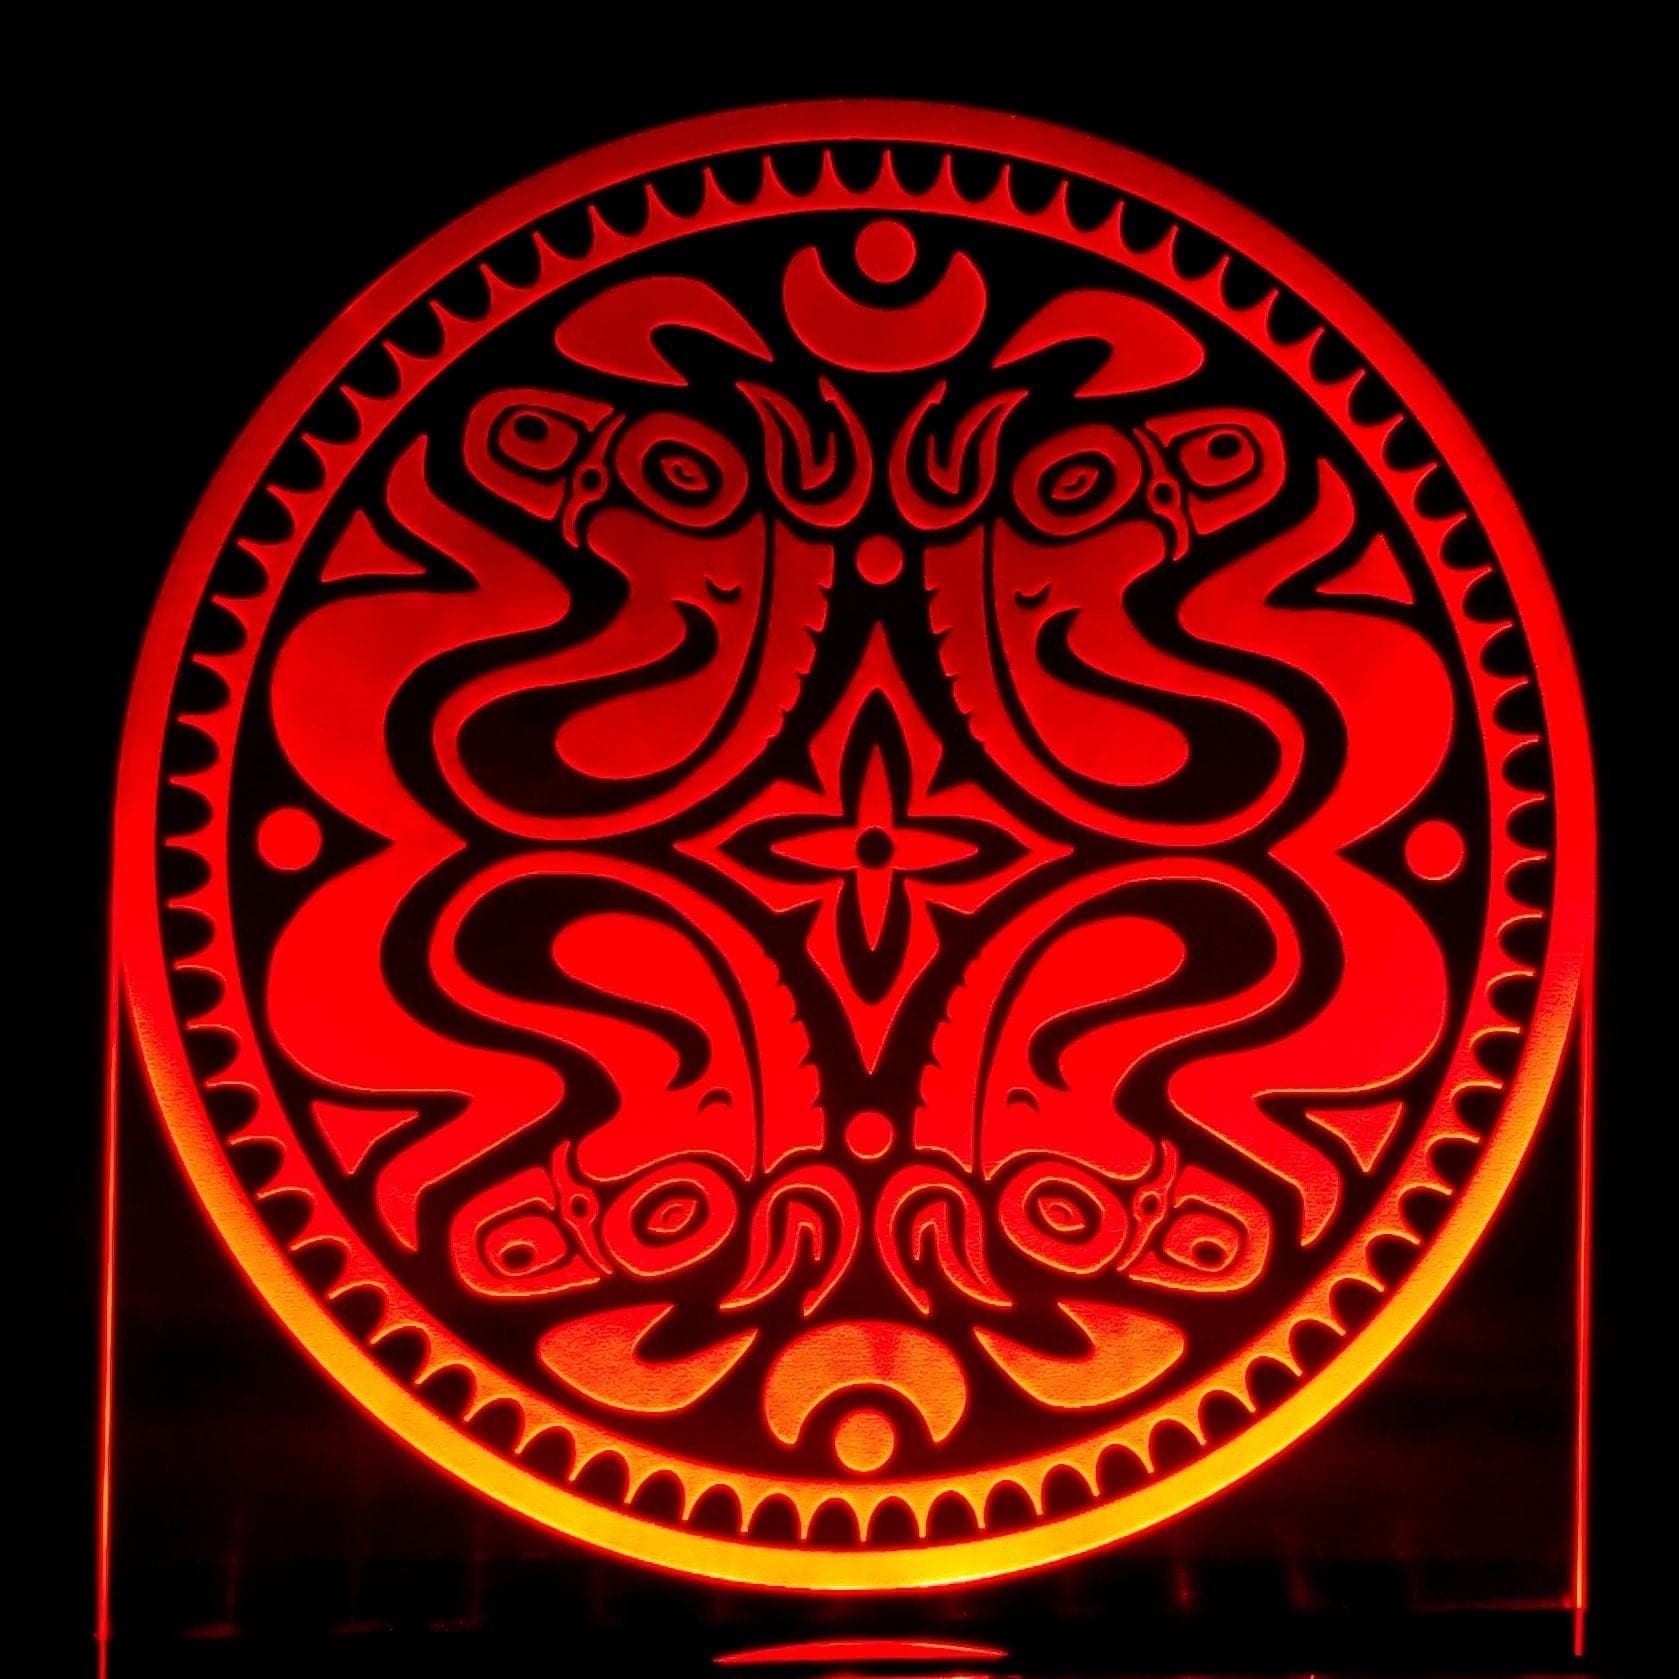 Gov't Mule With 4 Mules LED tabletop light lamp/sign - Neon-like - Free shipping - Made in USA.